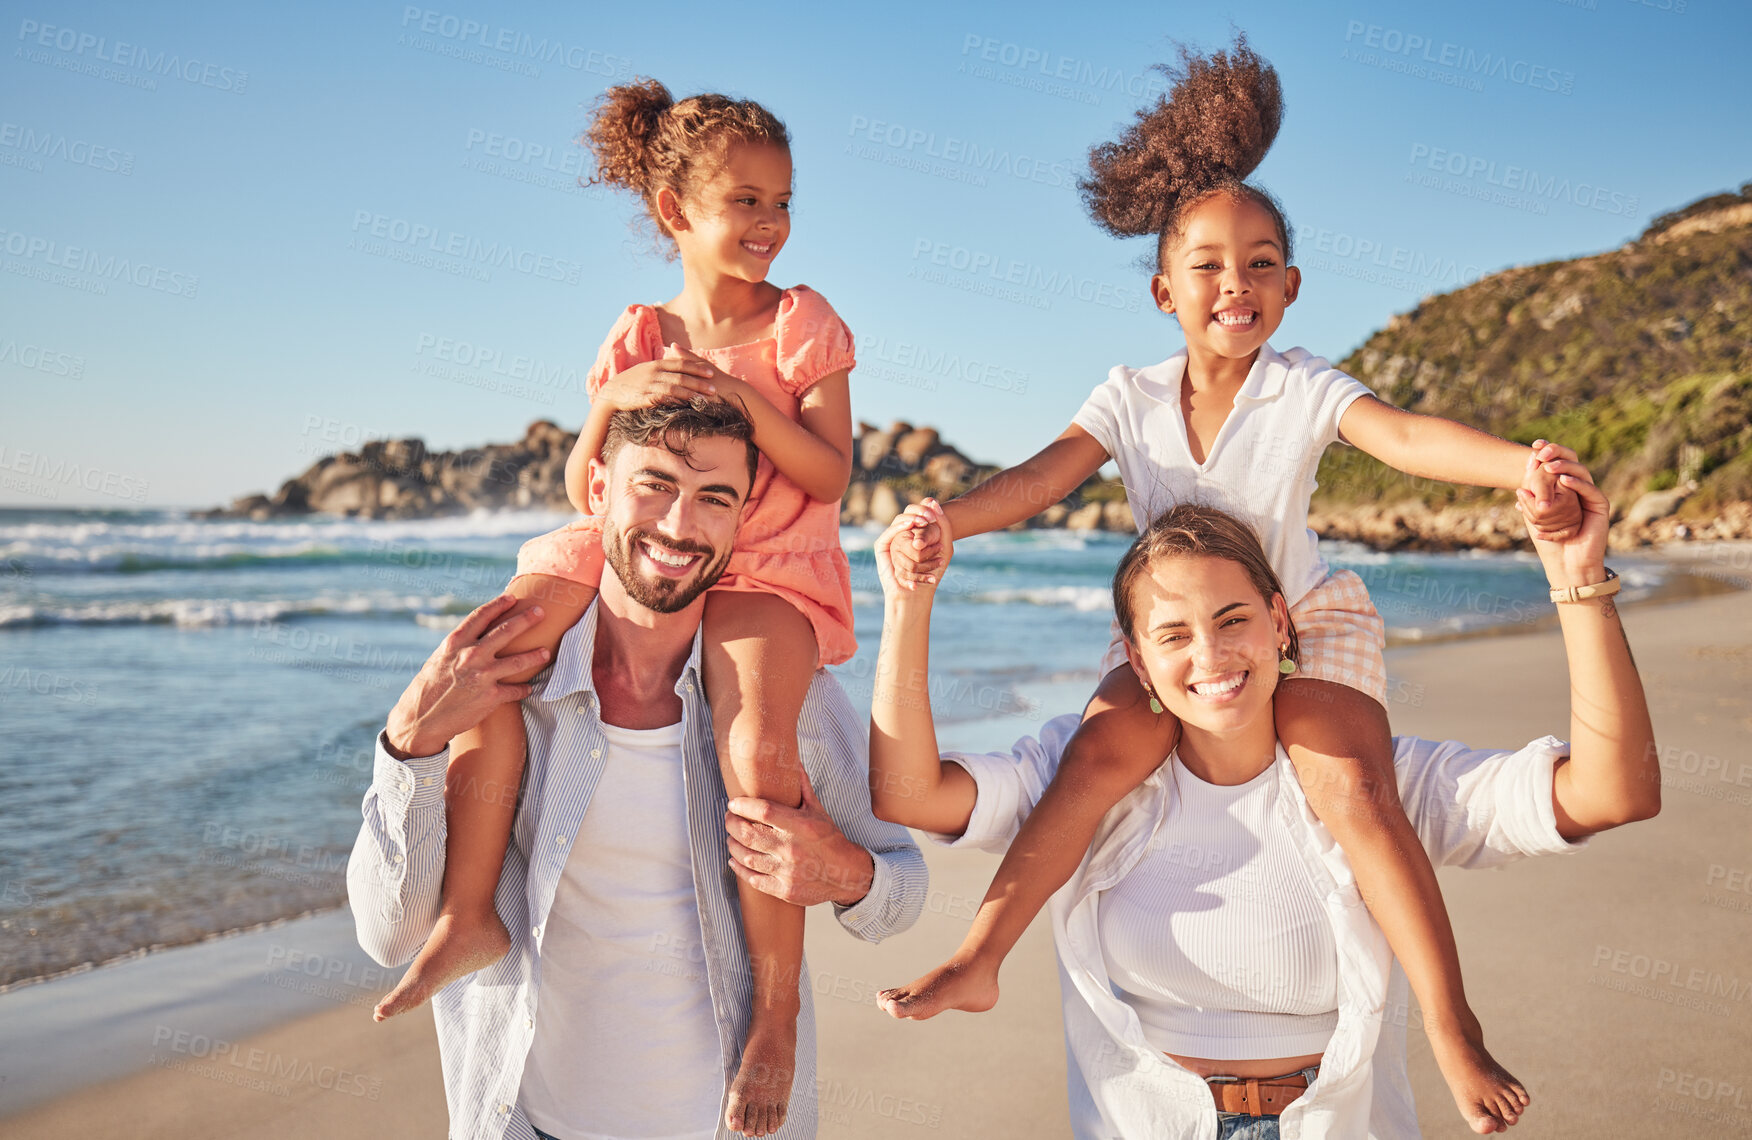 Buy stock photo Adoption, children and family beach portrait with interracial people enjoying Mexico holiday together. Love, support and care of foster parents giving happy kids a piggyback ride on ocean vacation.